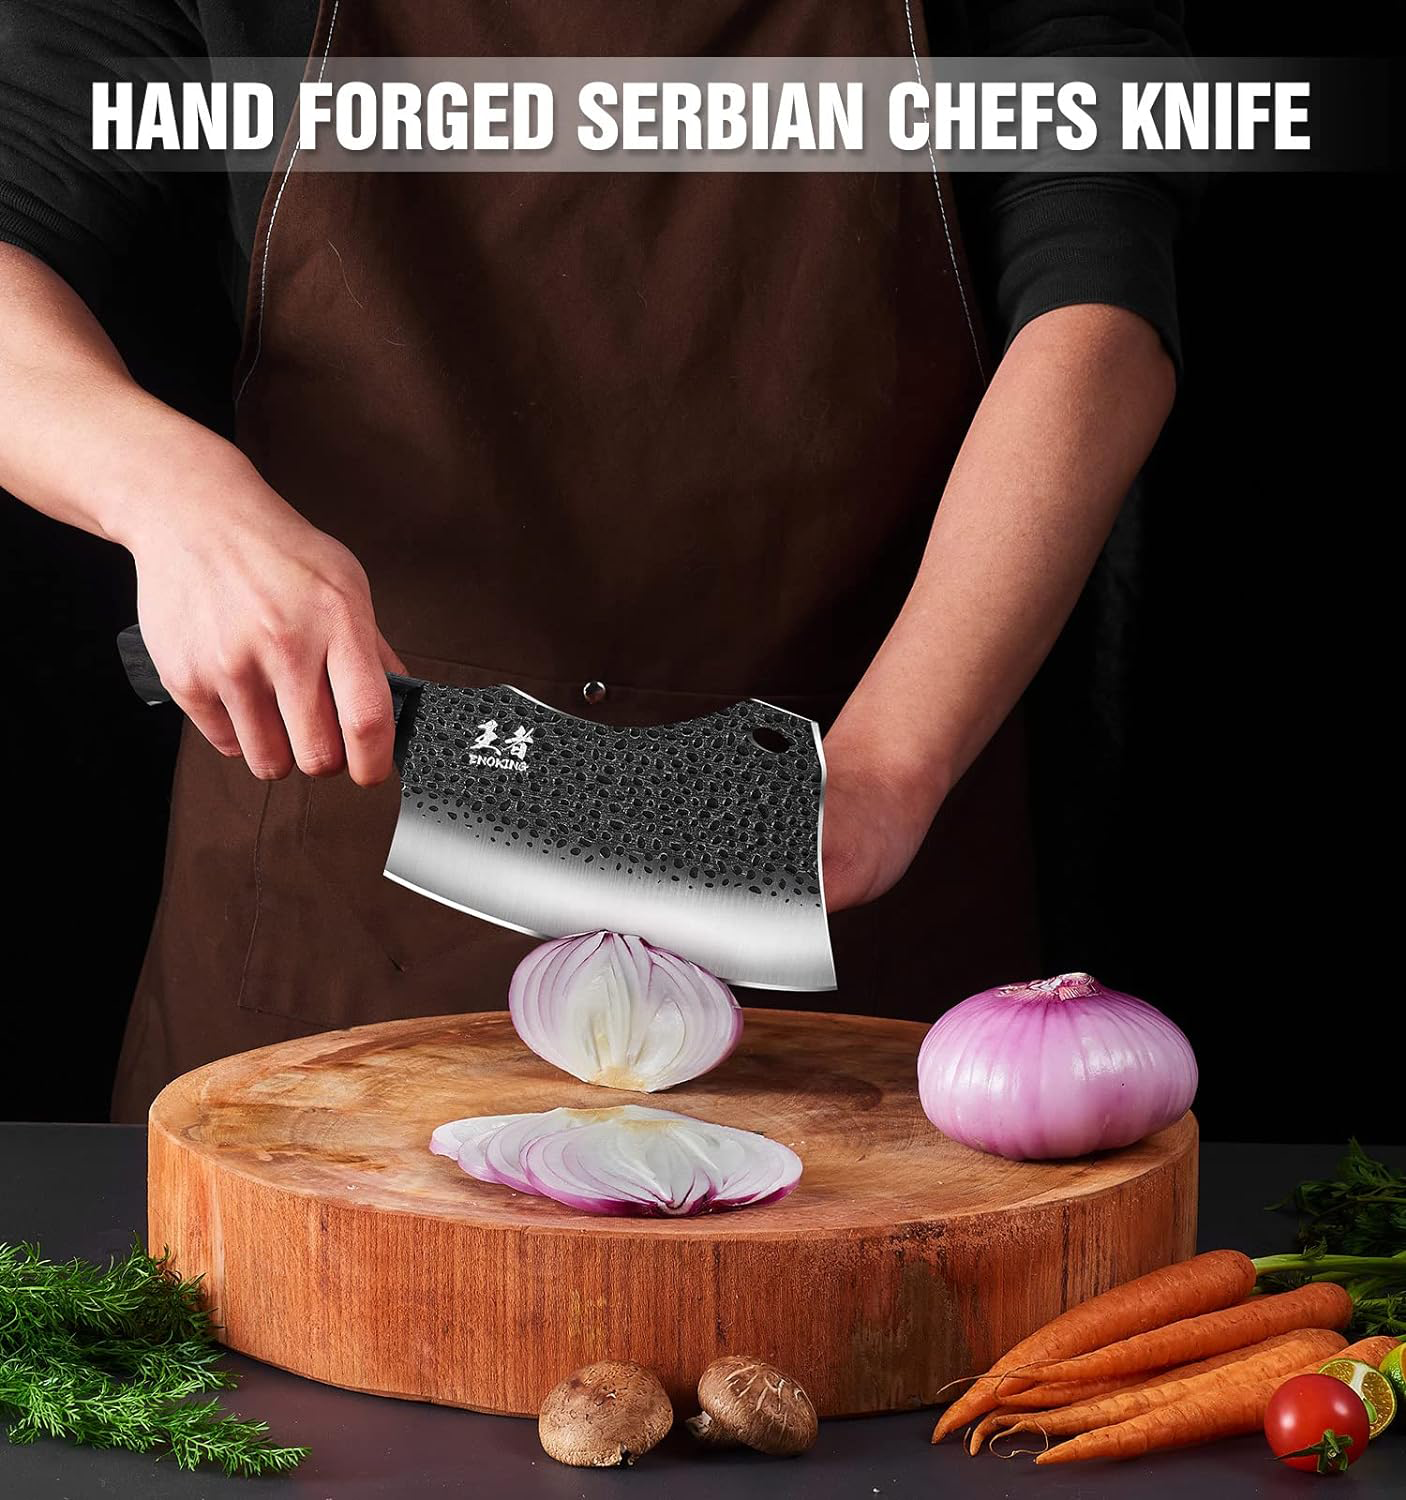  ENOKING Serbian Chef Knife 6.7 Inch, Handmade Professional Meat  Cleaver Knife with Leather Sheath, High-Carbon Clad Steel Butcher Knife  with Full Tang Handle for Kitchen, Camping, BBQ : Home & Kitchen